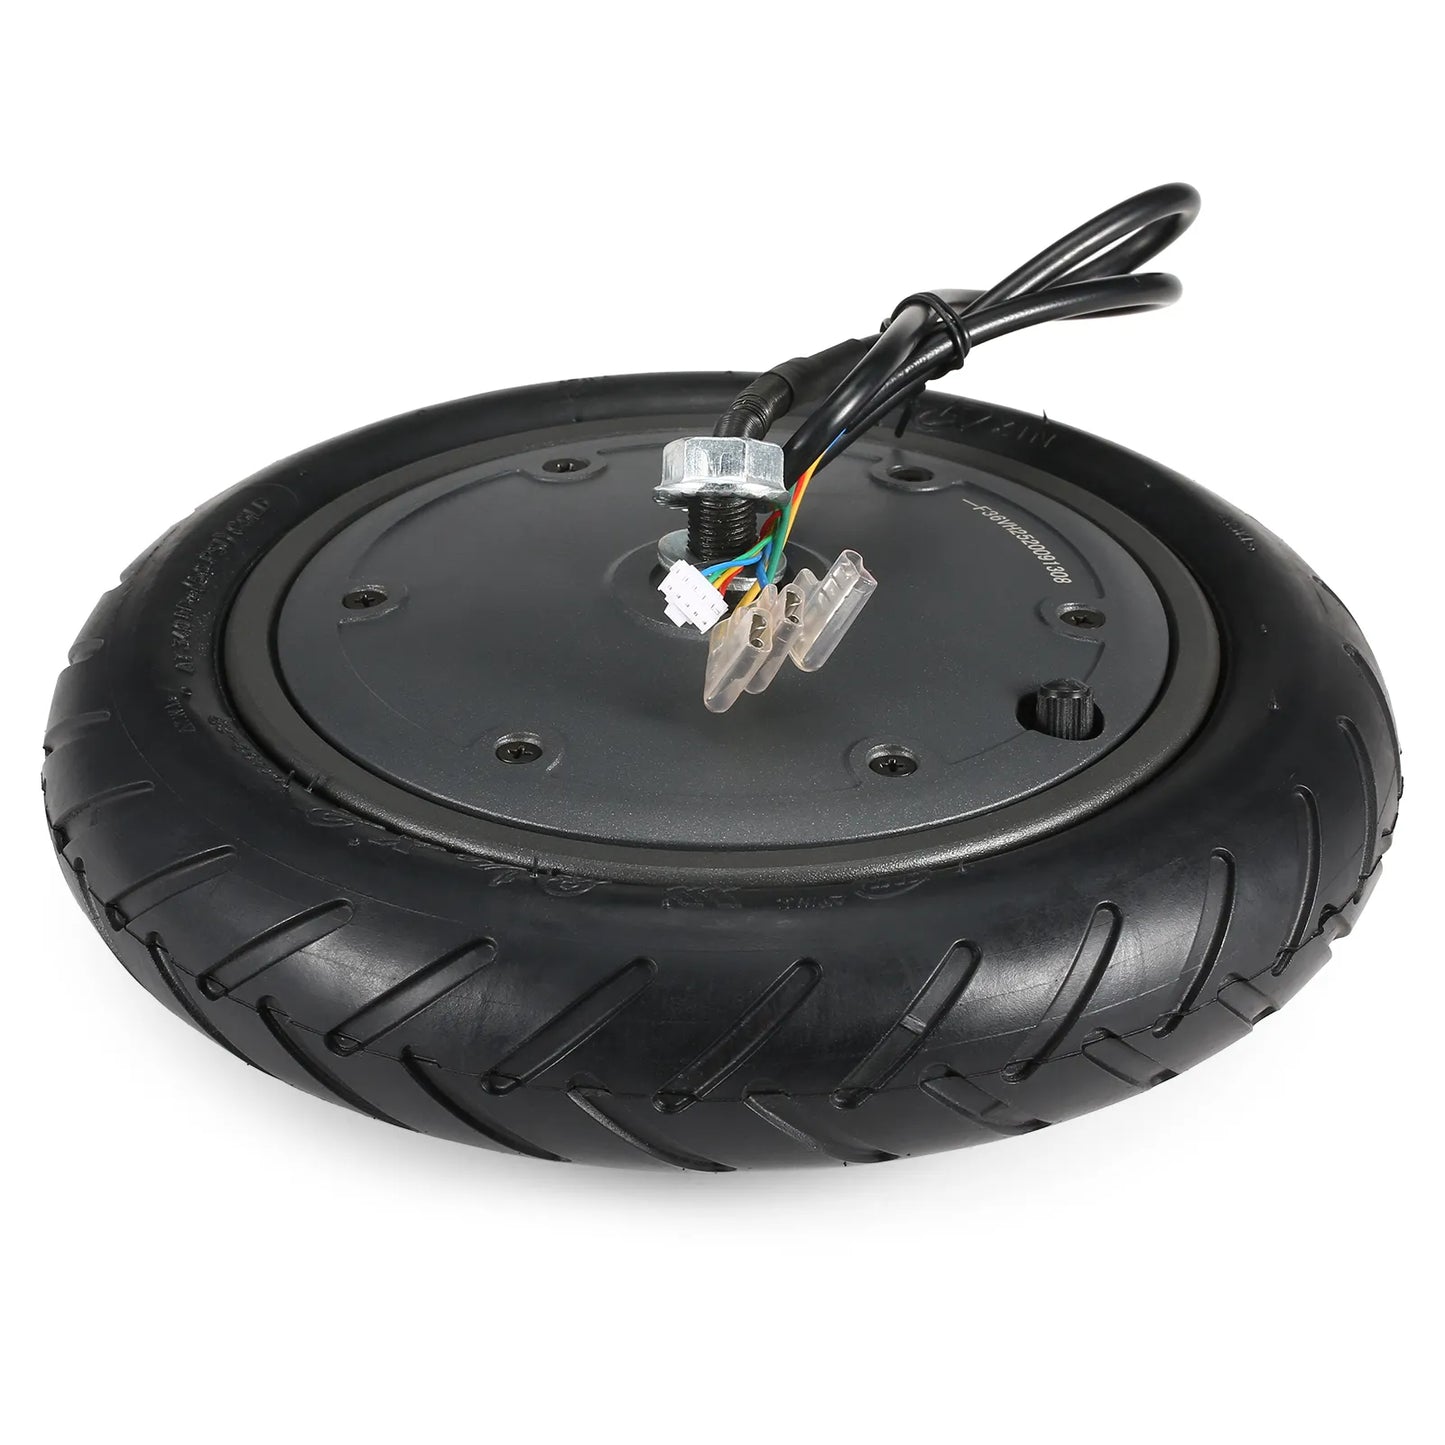 350W Motor with tire